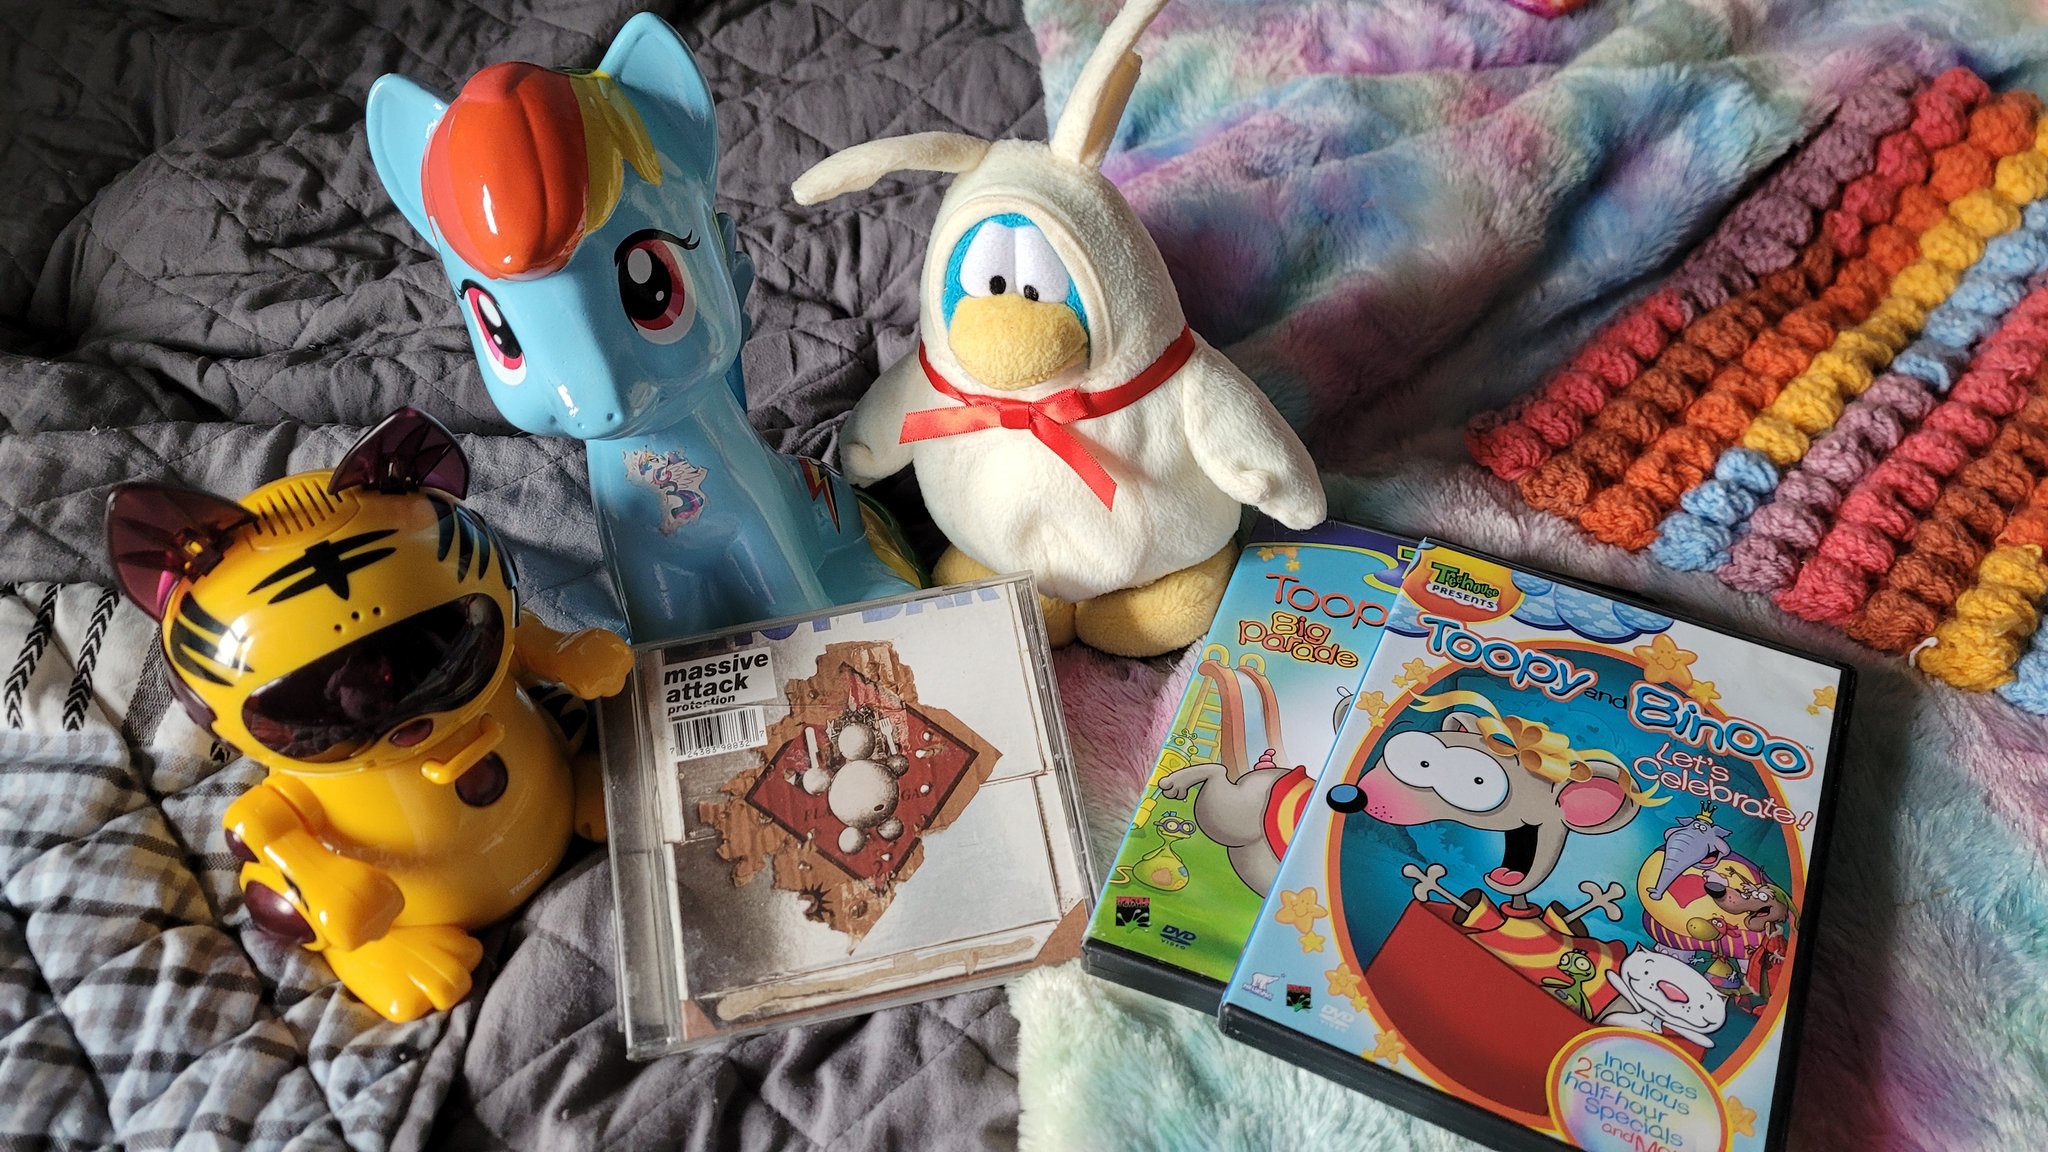 Picture showing a Tiger Electronics orange striped Meow-chi, a My Little Pony Rainbow Dash piggy bank, a CD of Massive Attack's album 'Protection,' a Club Penguin plush of a blue penguin dressed as a white chocolate bunny, and two Toopy and Binoo DVDs